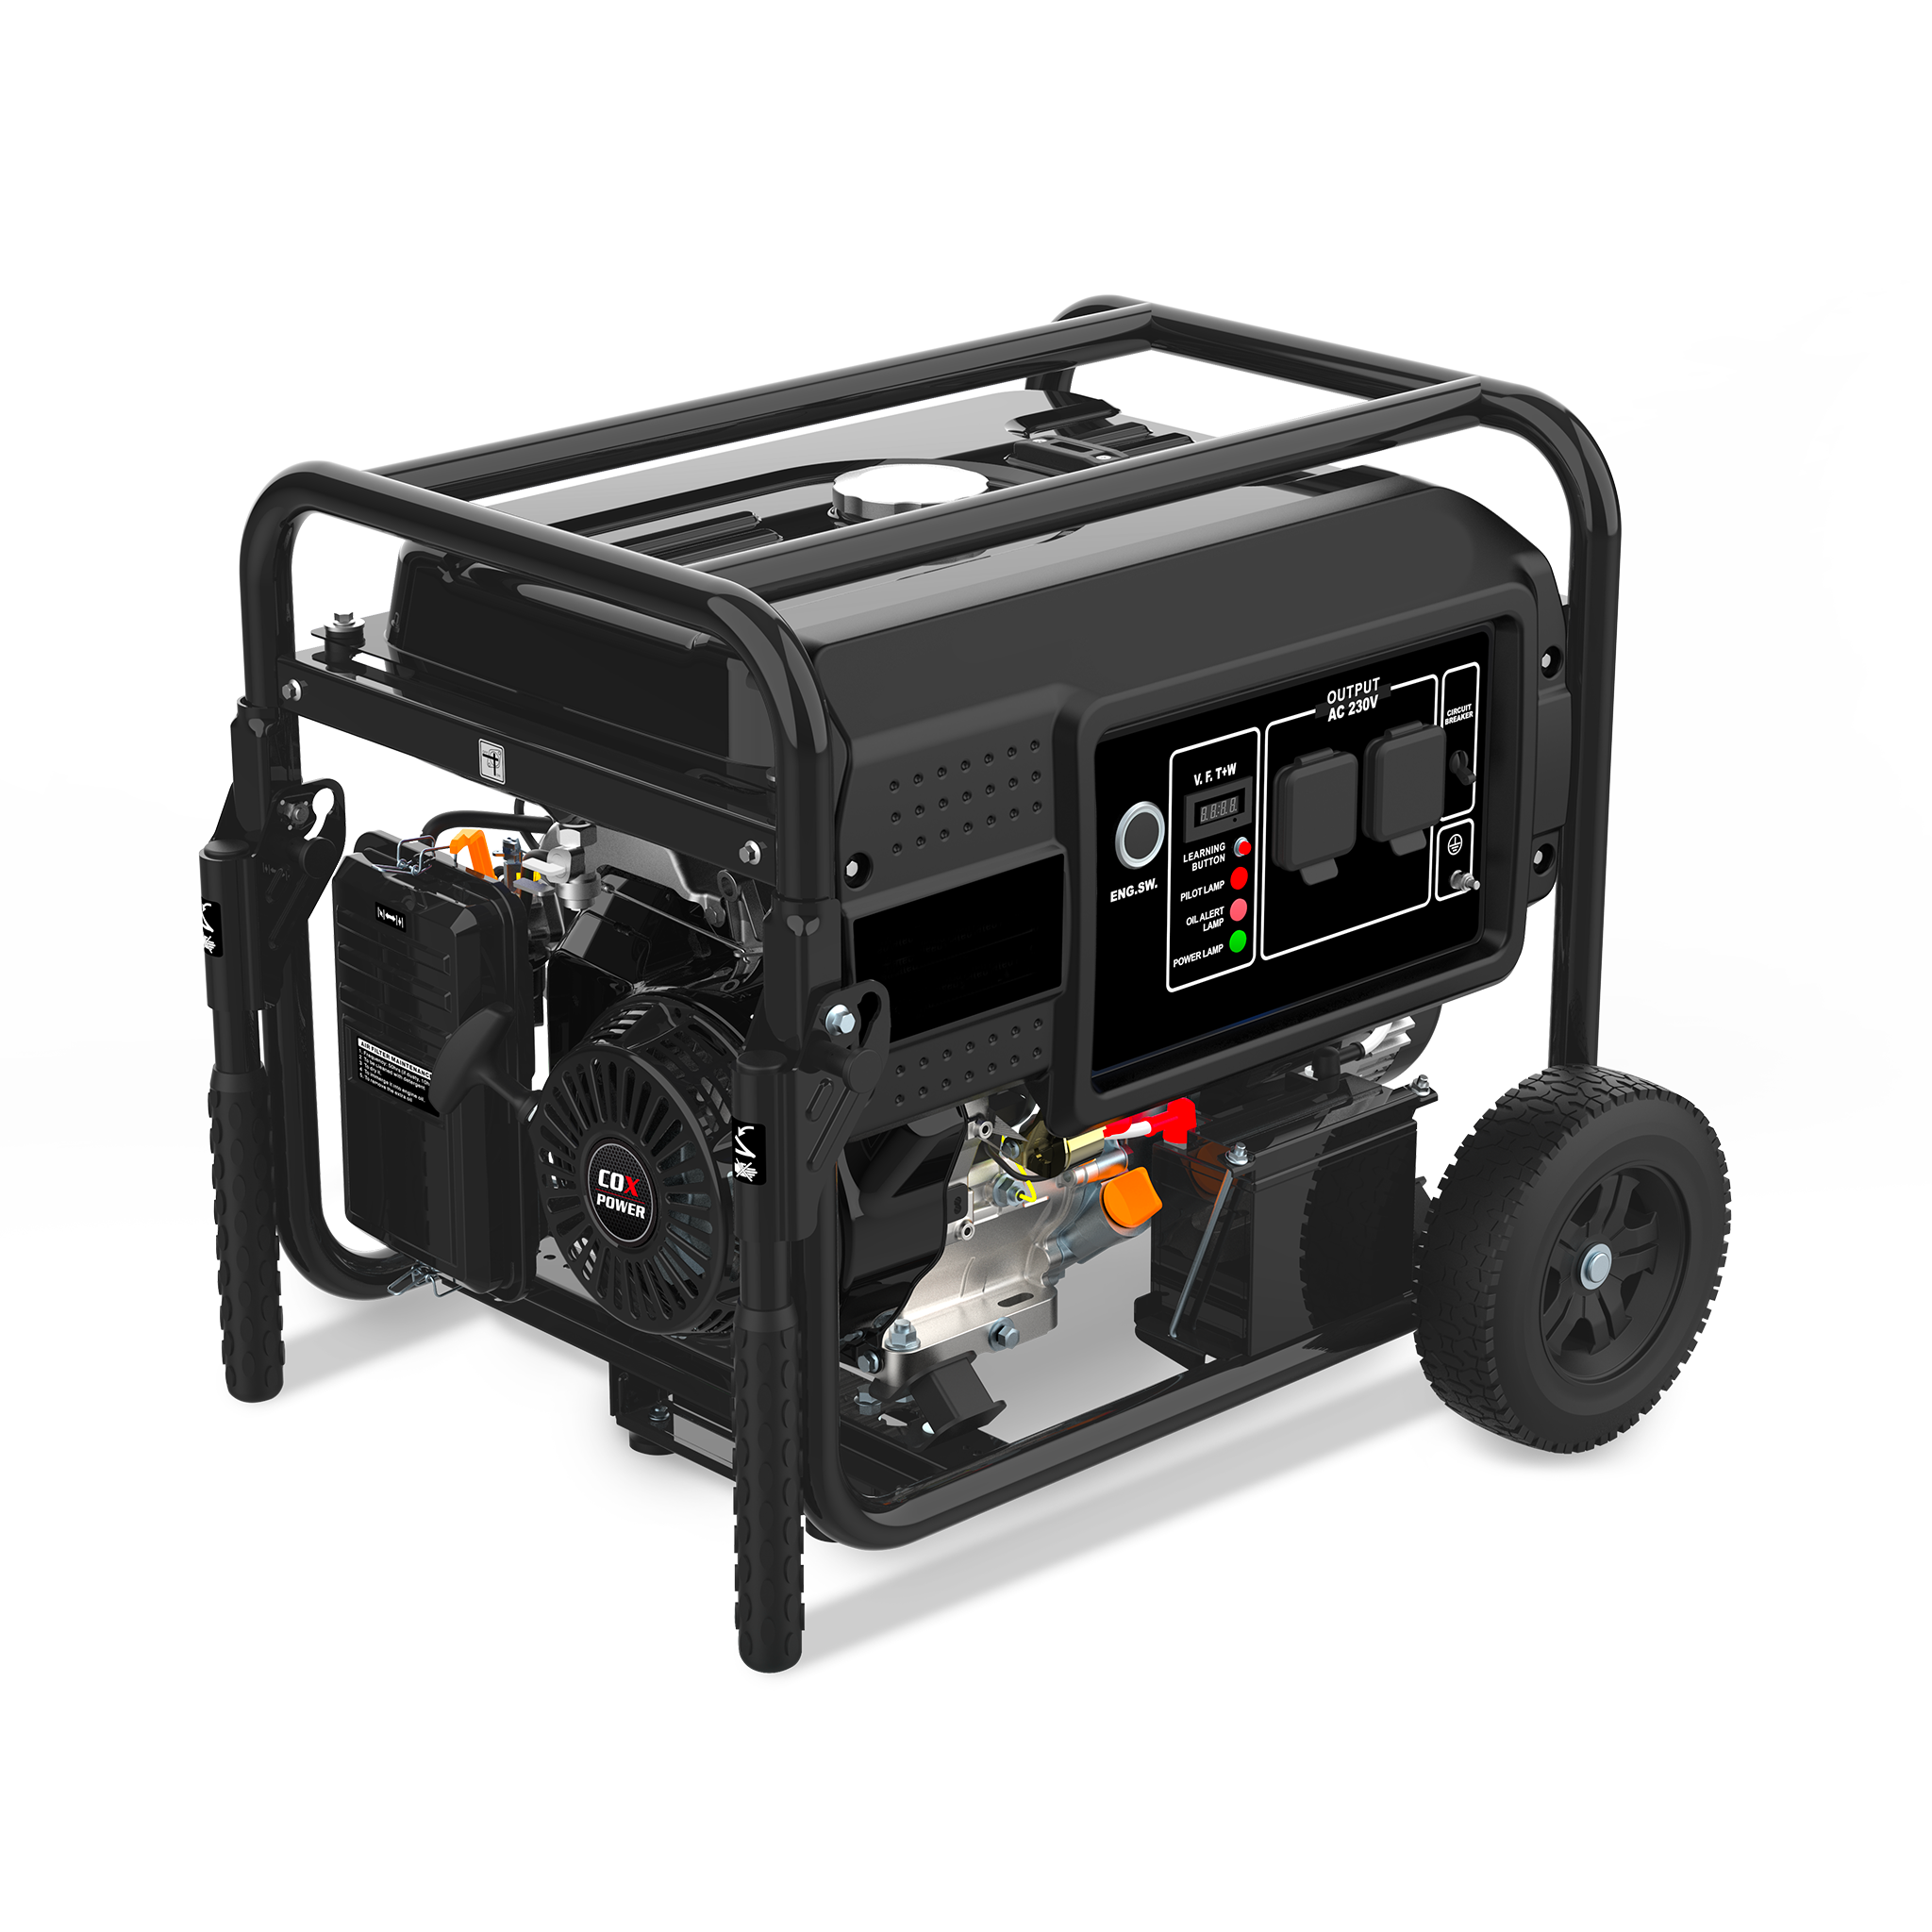 Product Image of a COX Power 6.5kw Electric Start Generator